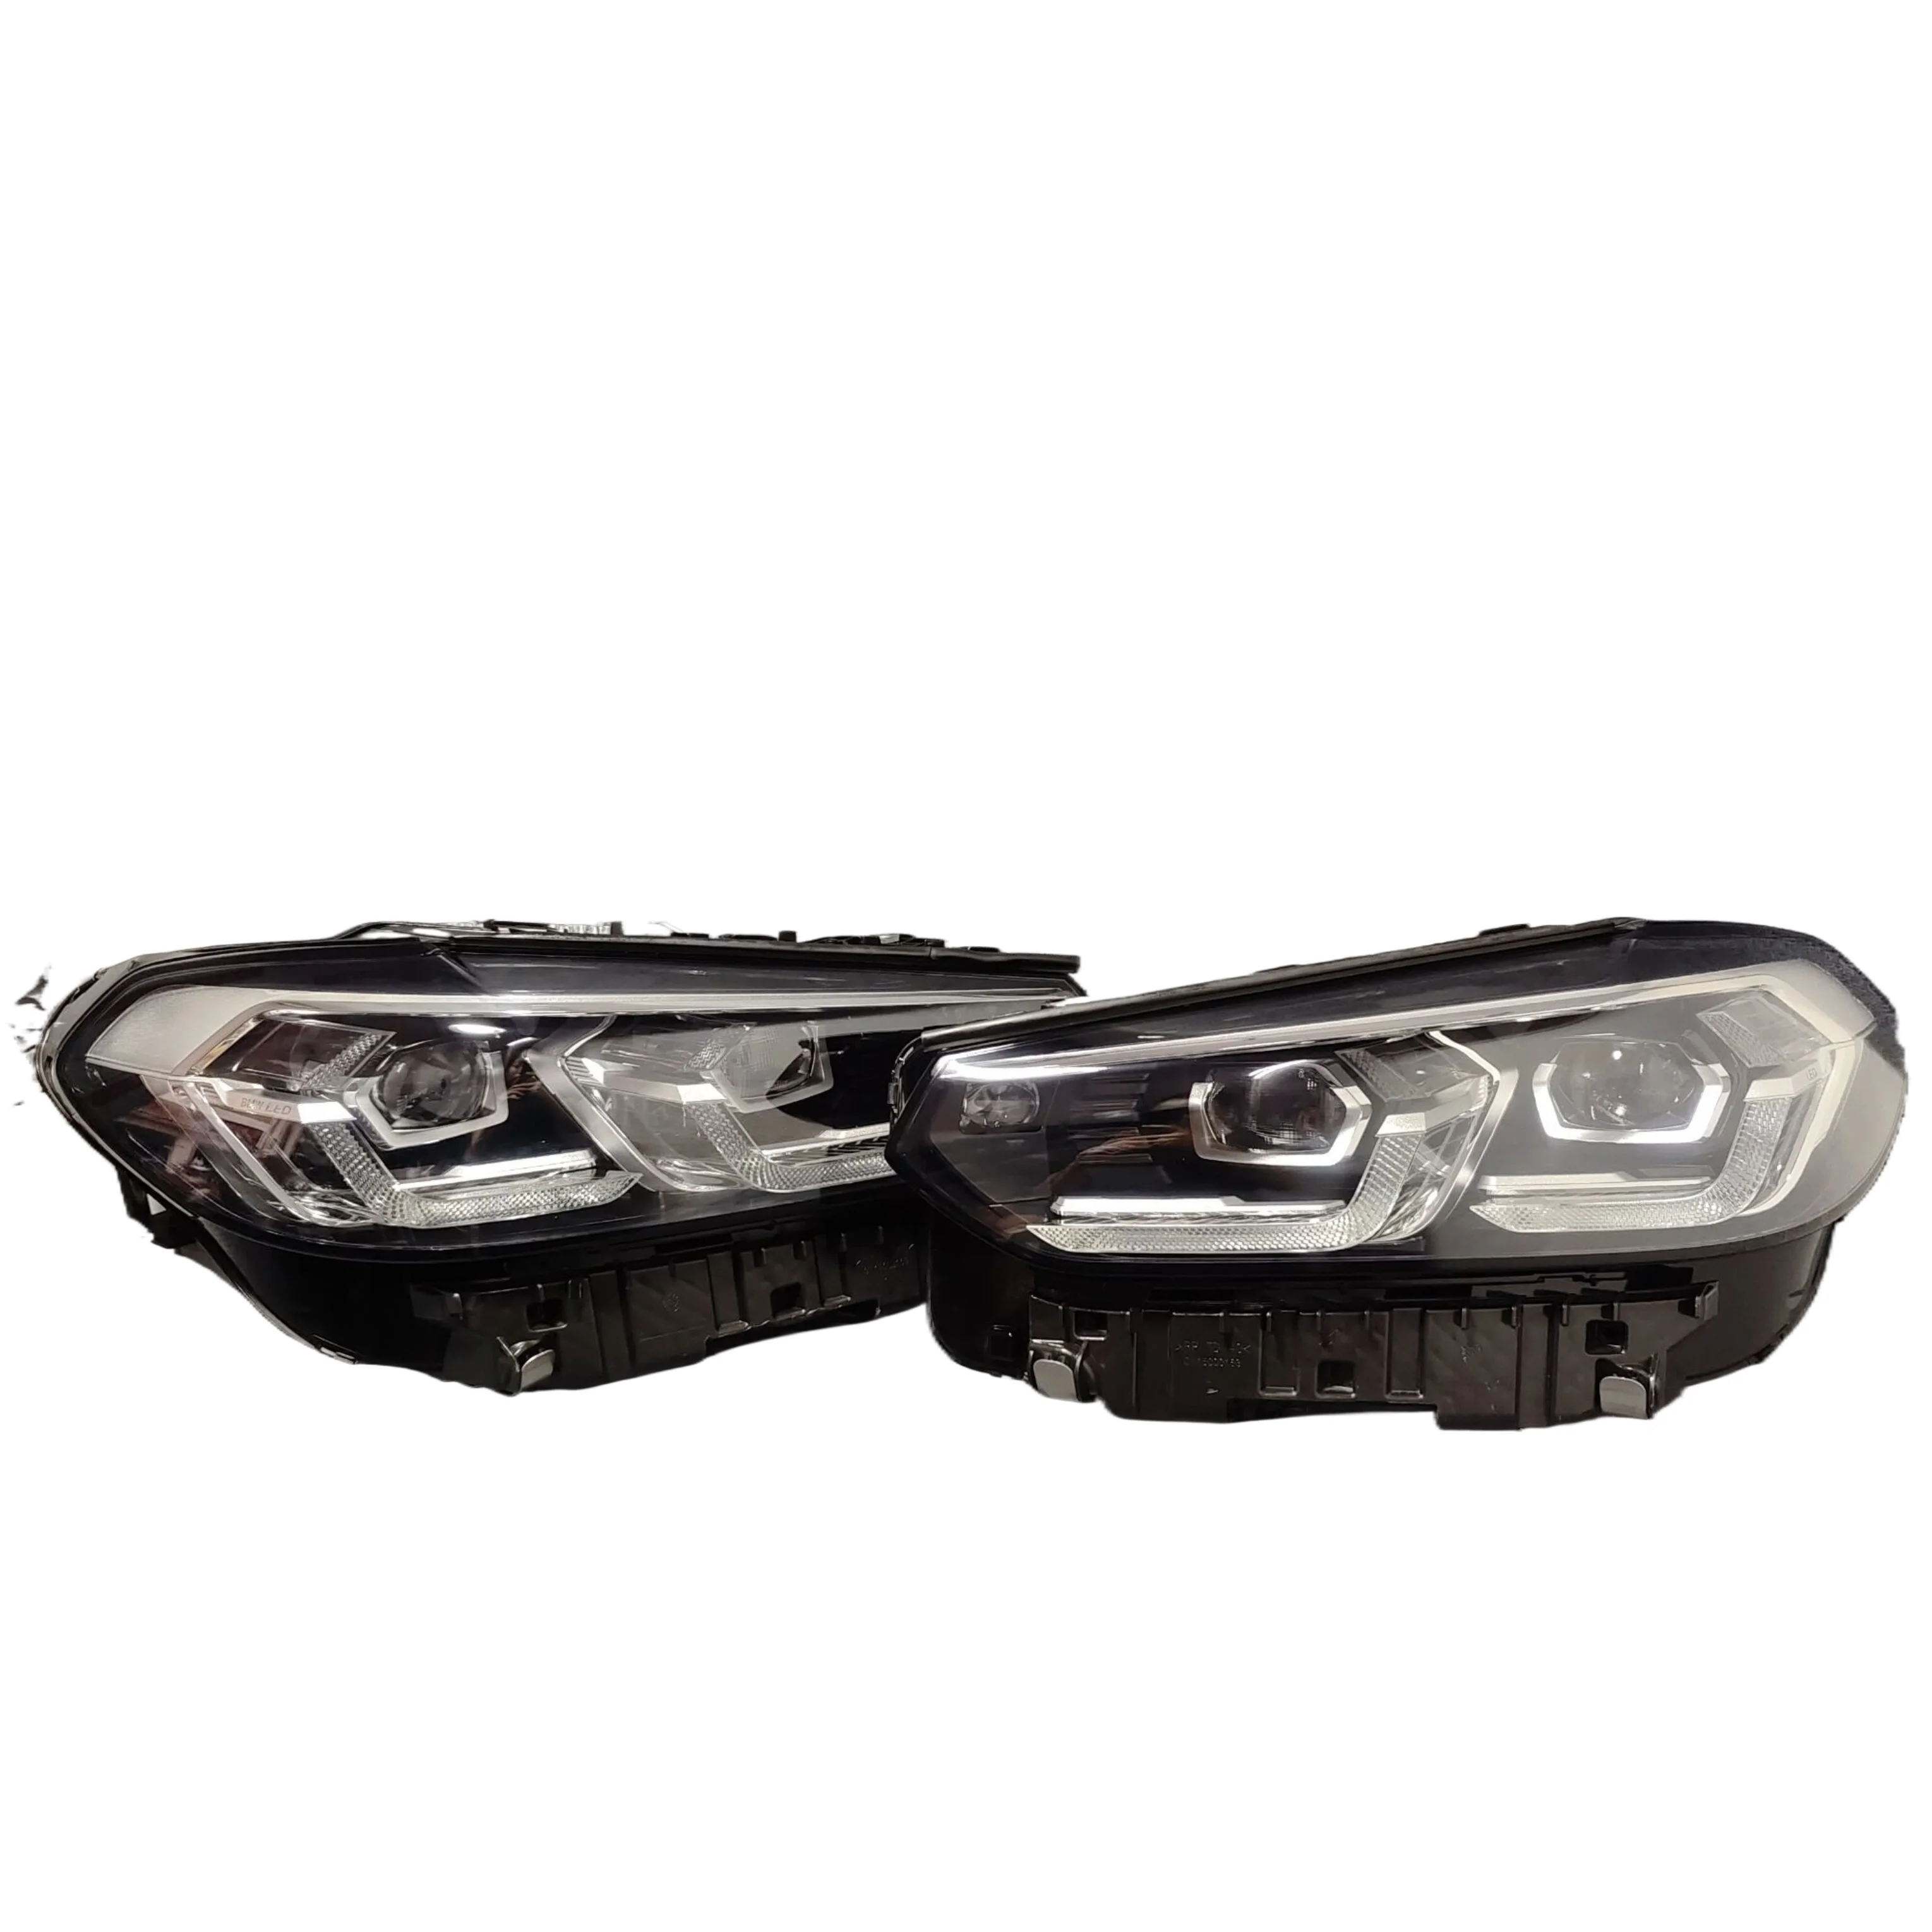 

Suitable for BMW X3, X4 car lighting system headlights, LED daytime running lights, suitable 2022-2023 model years